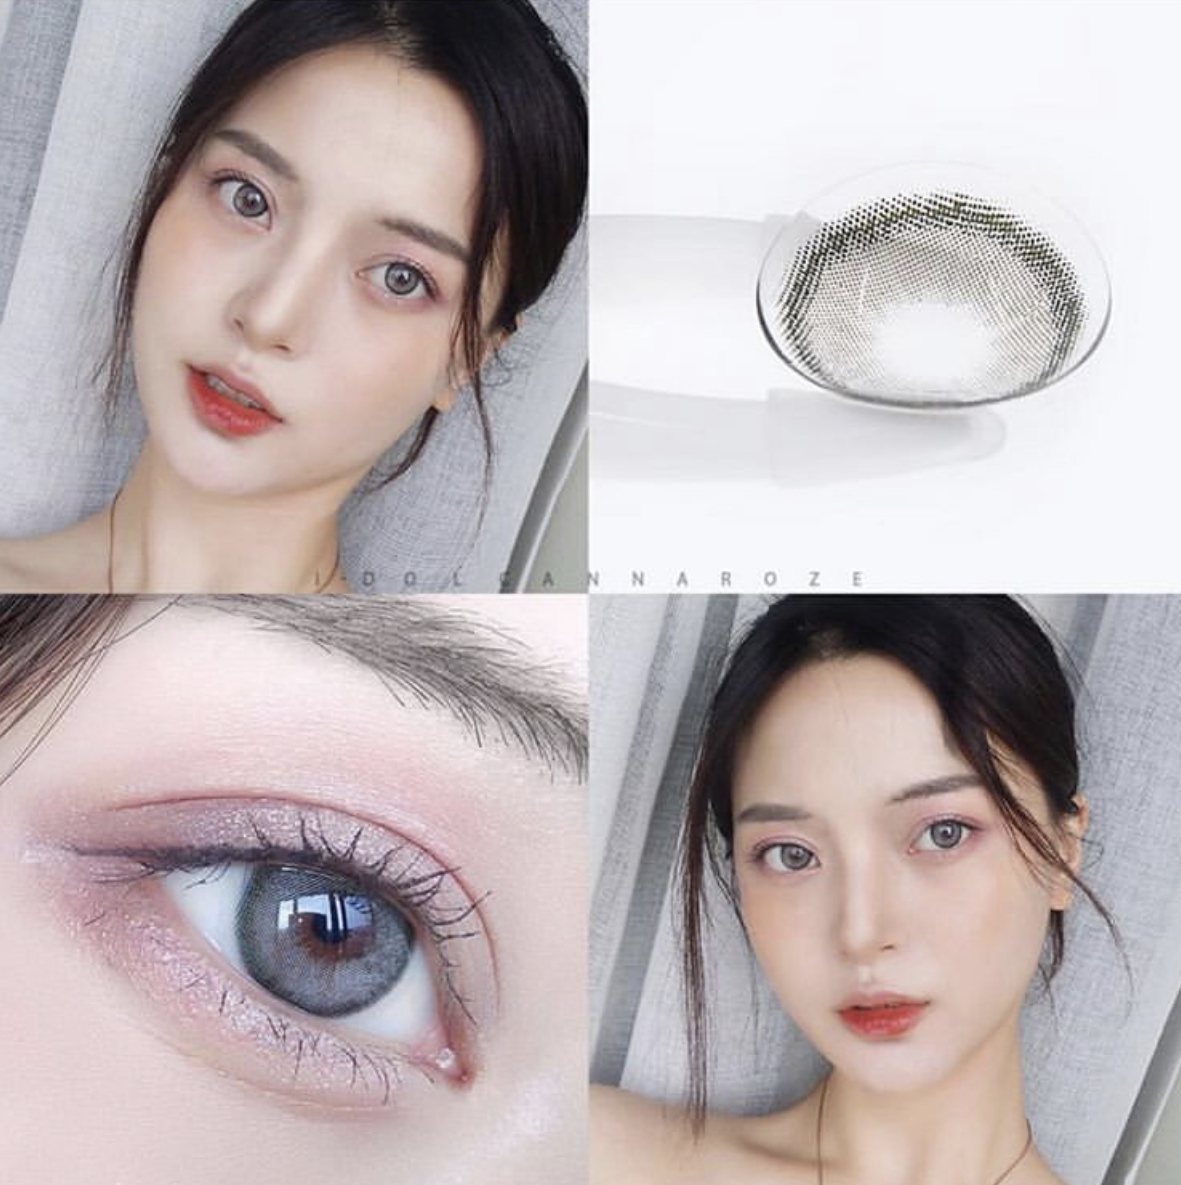 FRESHGO CANNA ROZE CHARCOAL GRAY (GREY) COSMETIC COLORED CONTACT LENSE